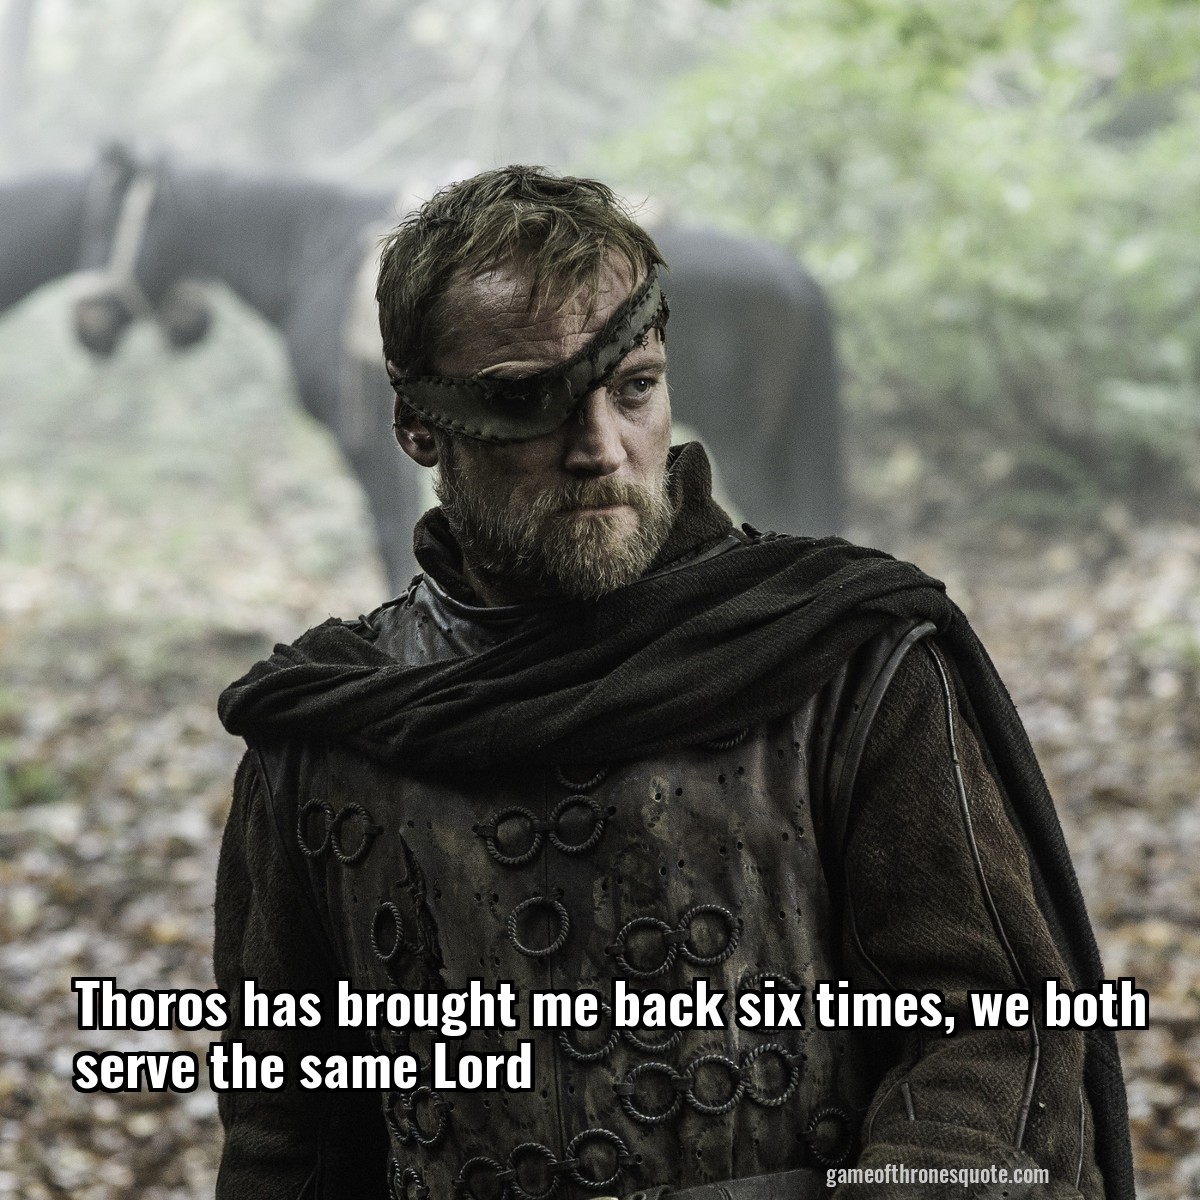 Thoros has brought me back six times, we both serve the same Lord